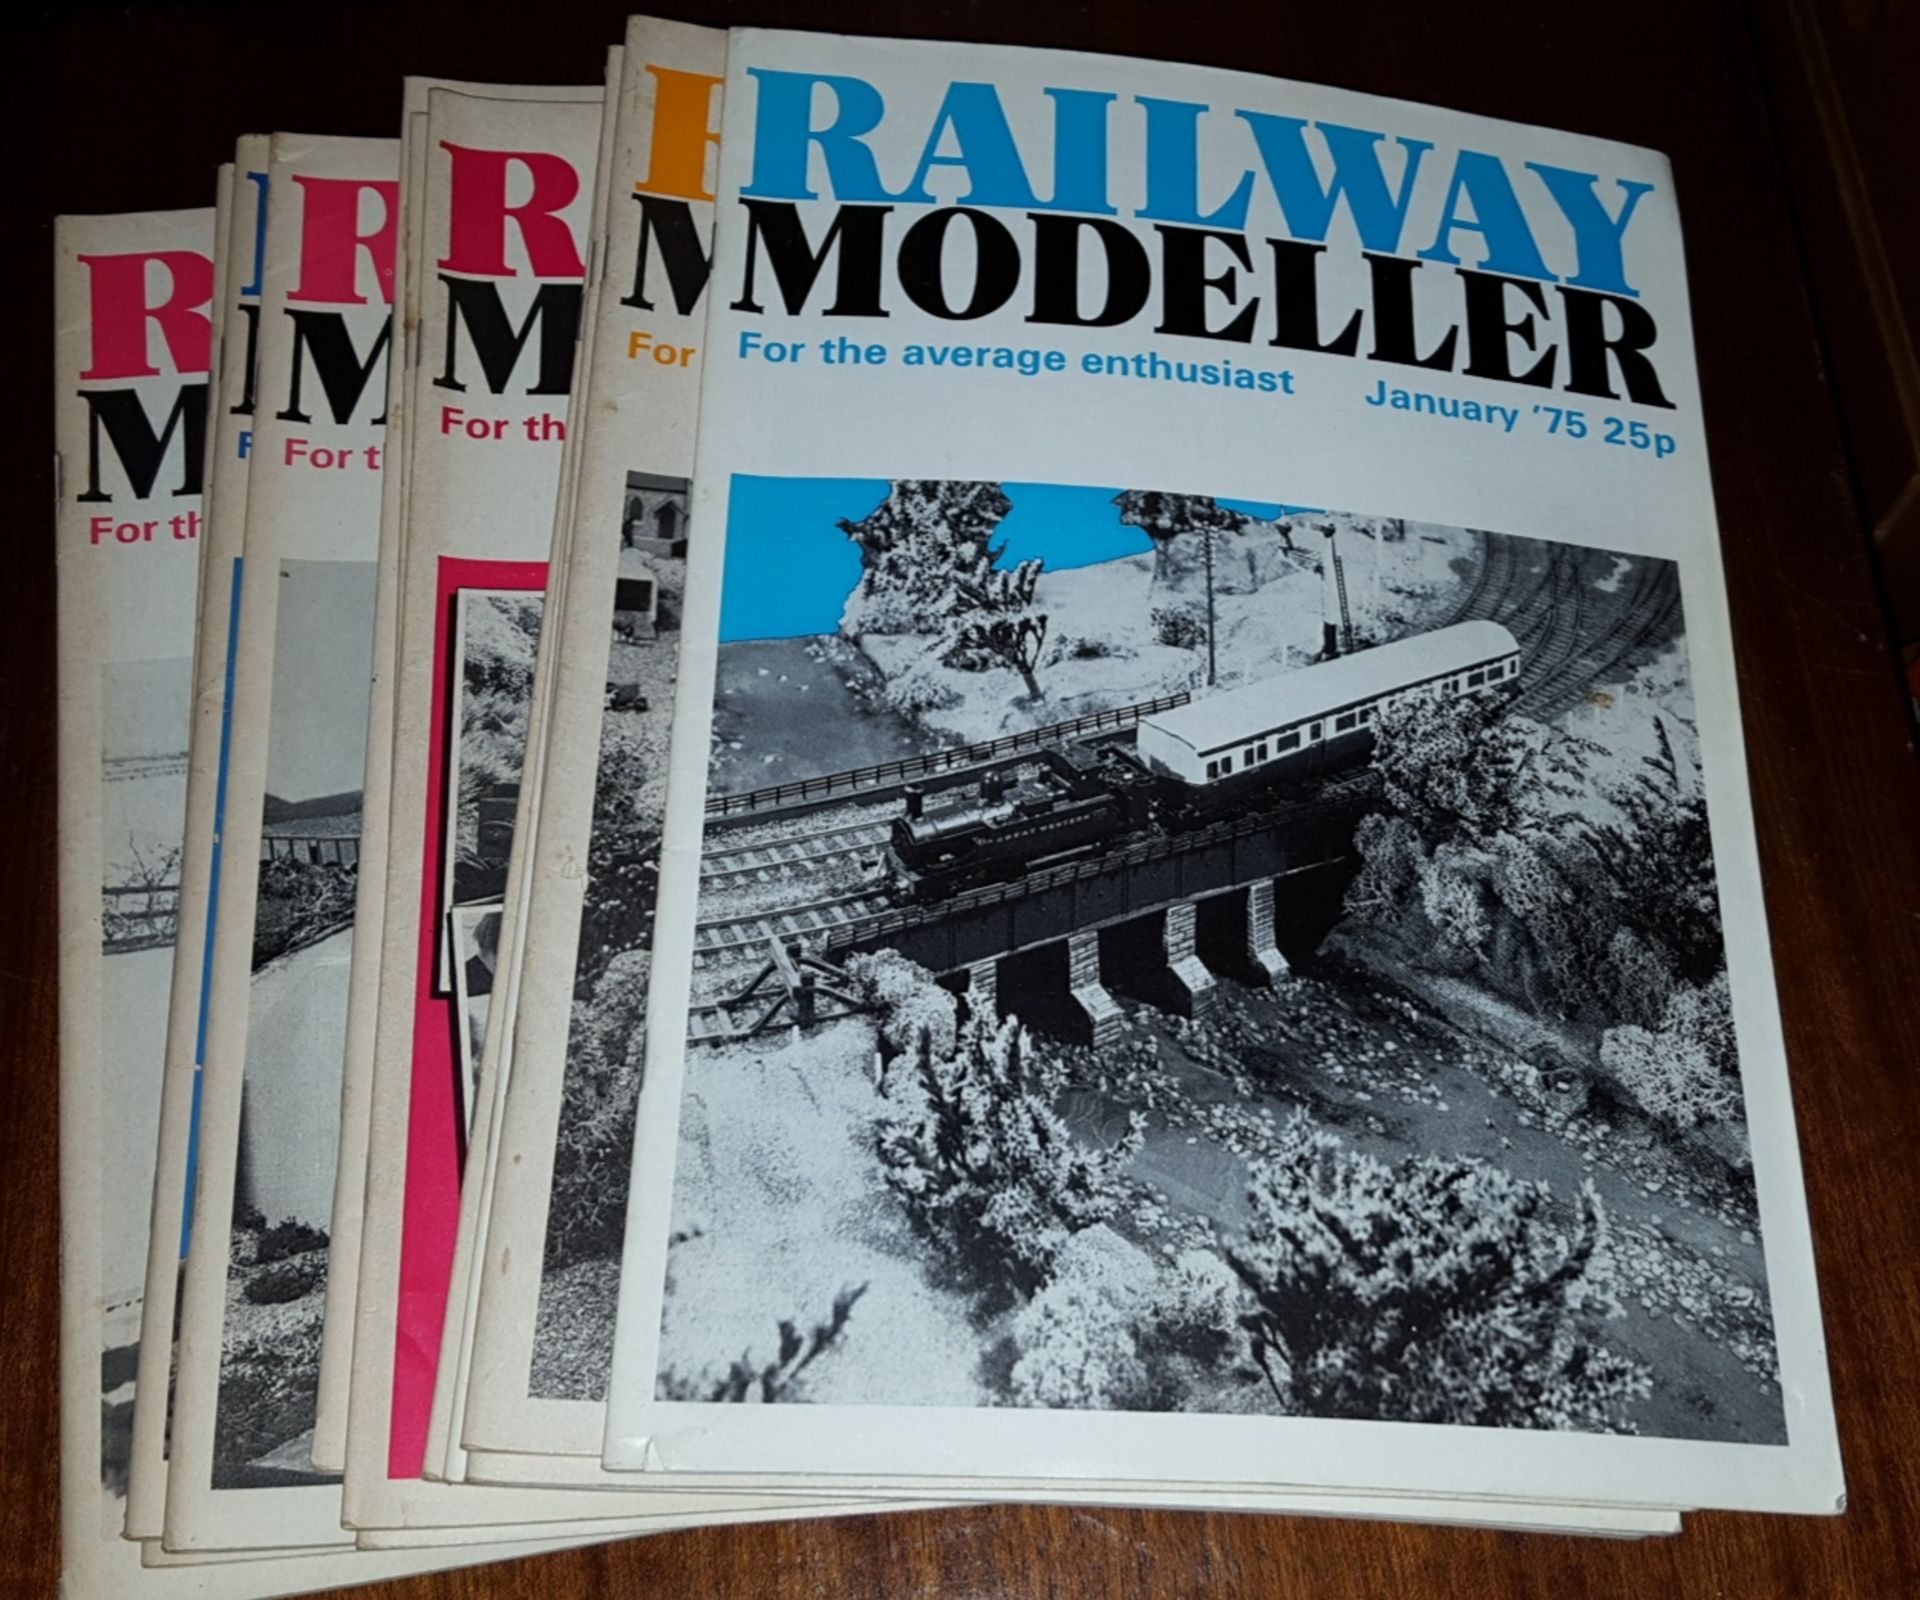 38 x Collectable Railway Magazines 'Railway Modeller' 1962, 1975 & 1980 NO RESERVE - Image 5 of 5